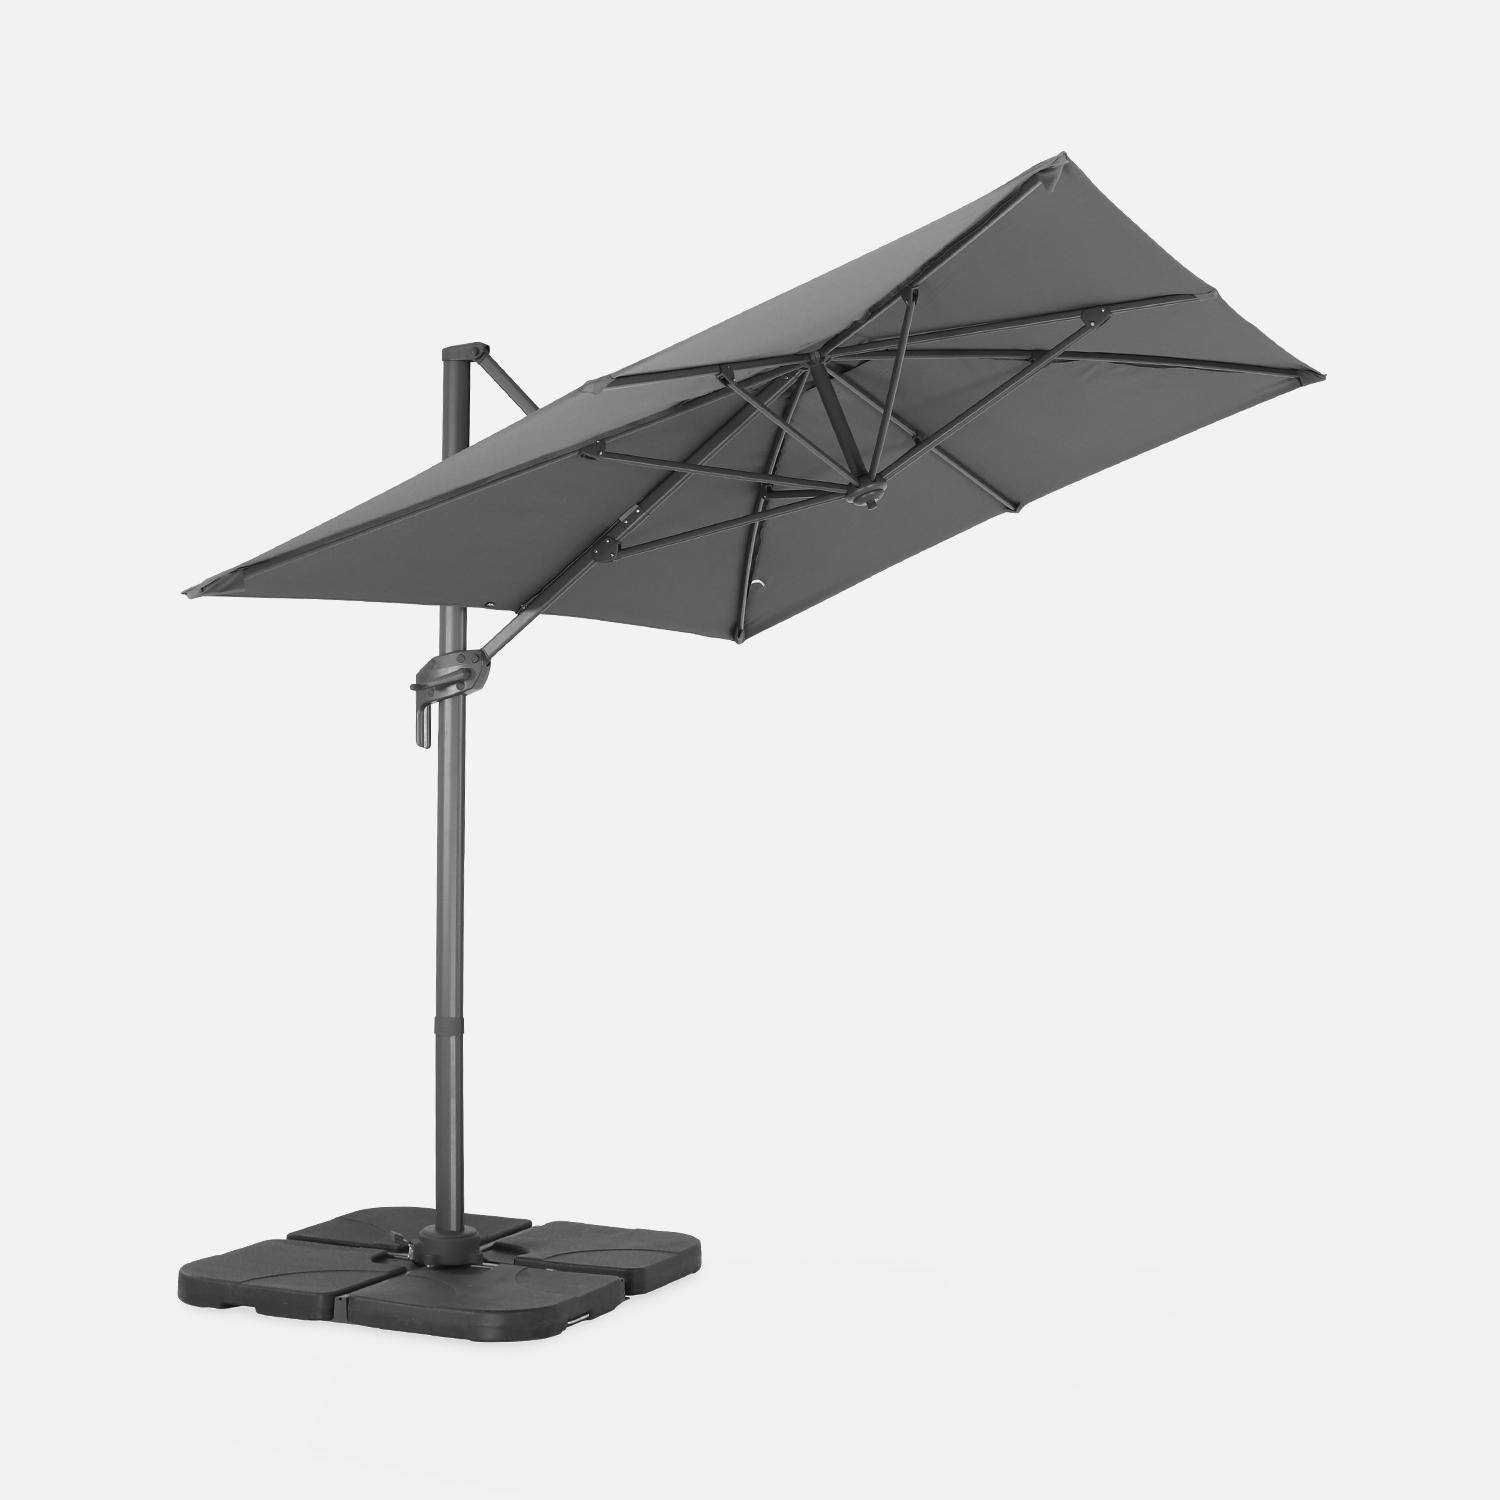 2x3m rectangular cantilever paraso - parasol can be tilted, folded and rotated 360 degreesl - Antibes - Grey Photo5